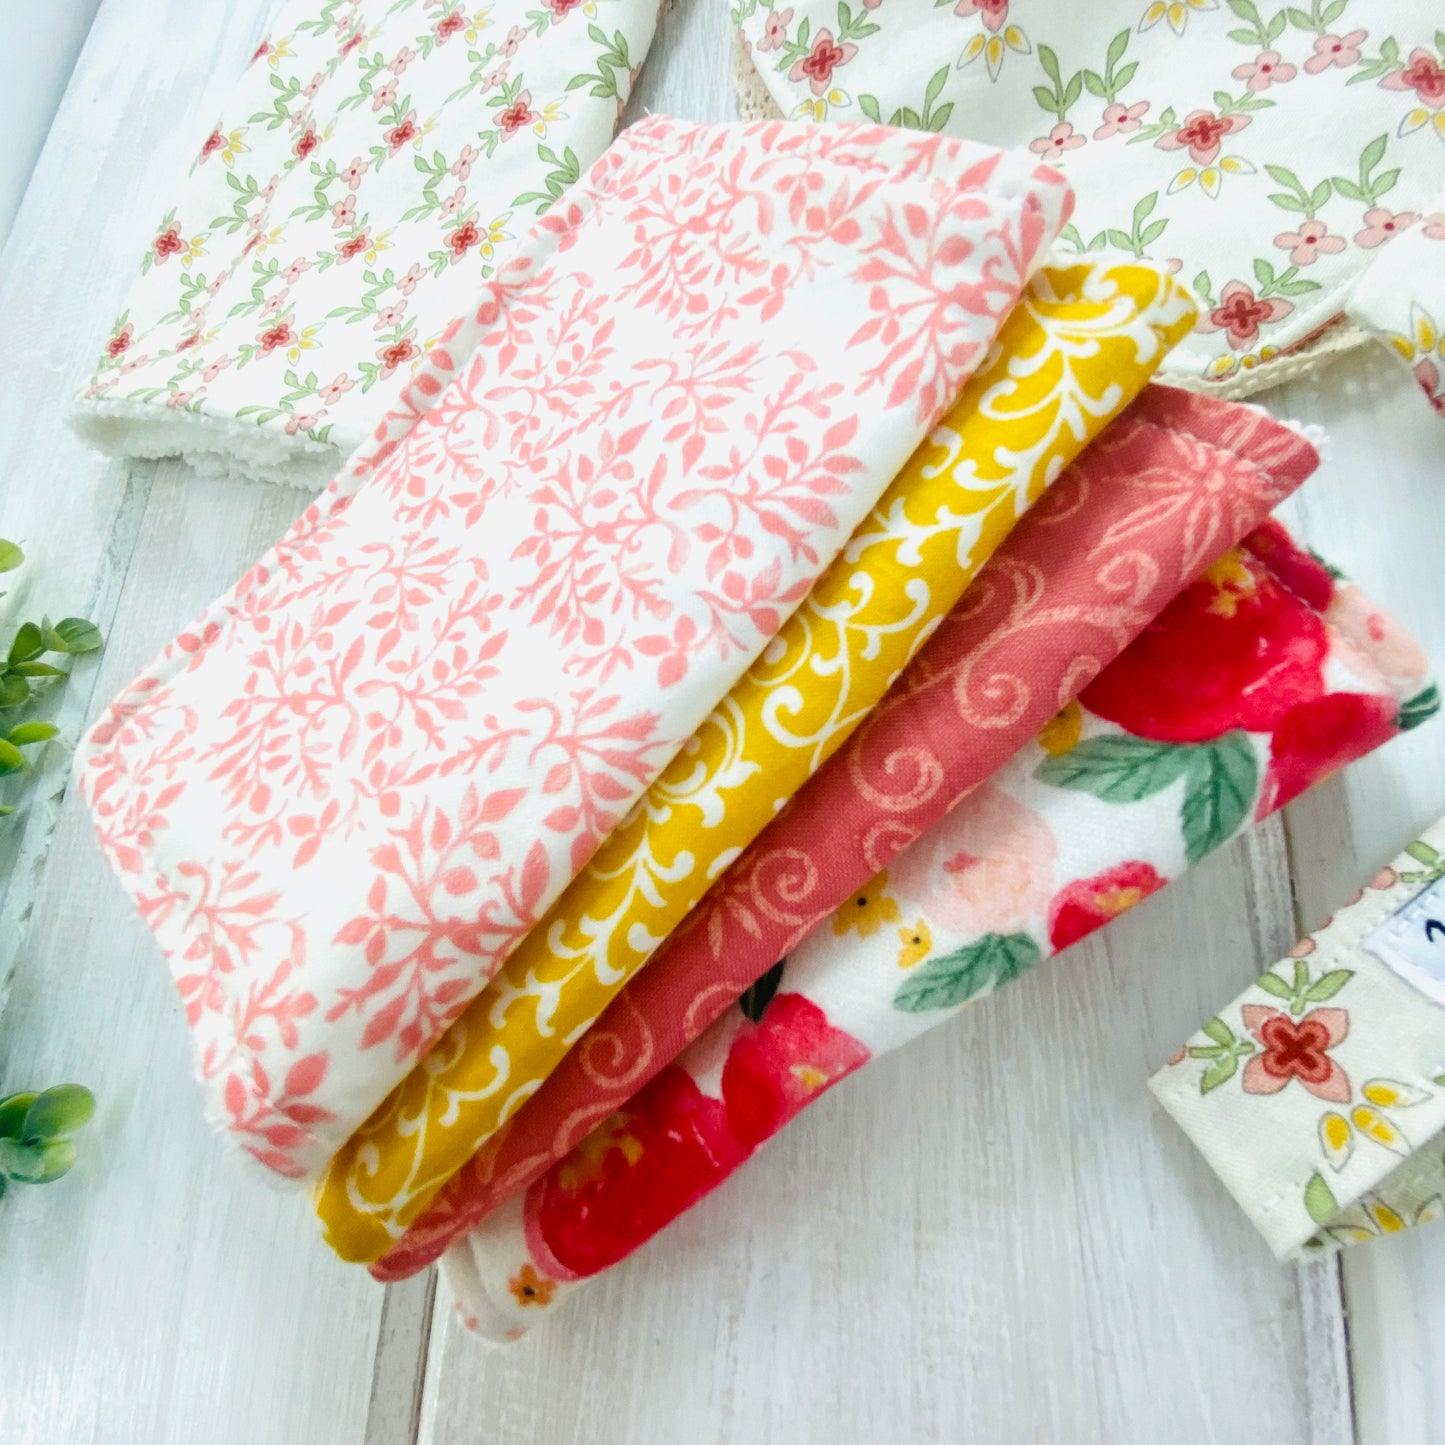 Set of 4 reusable baby wipes or baby washing cloths.